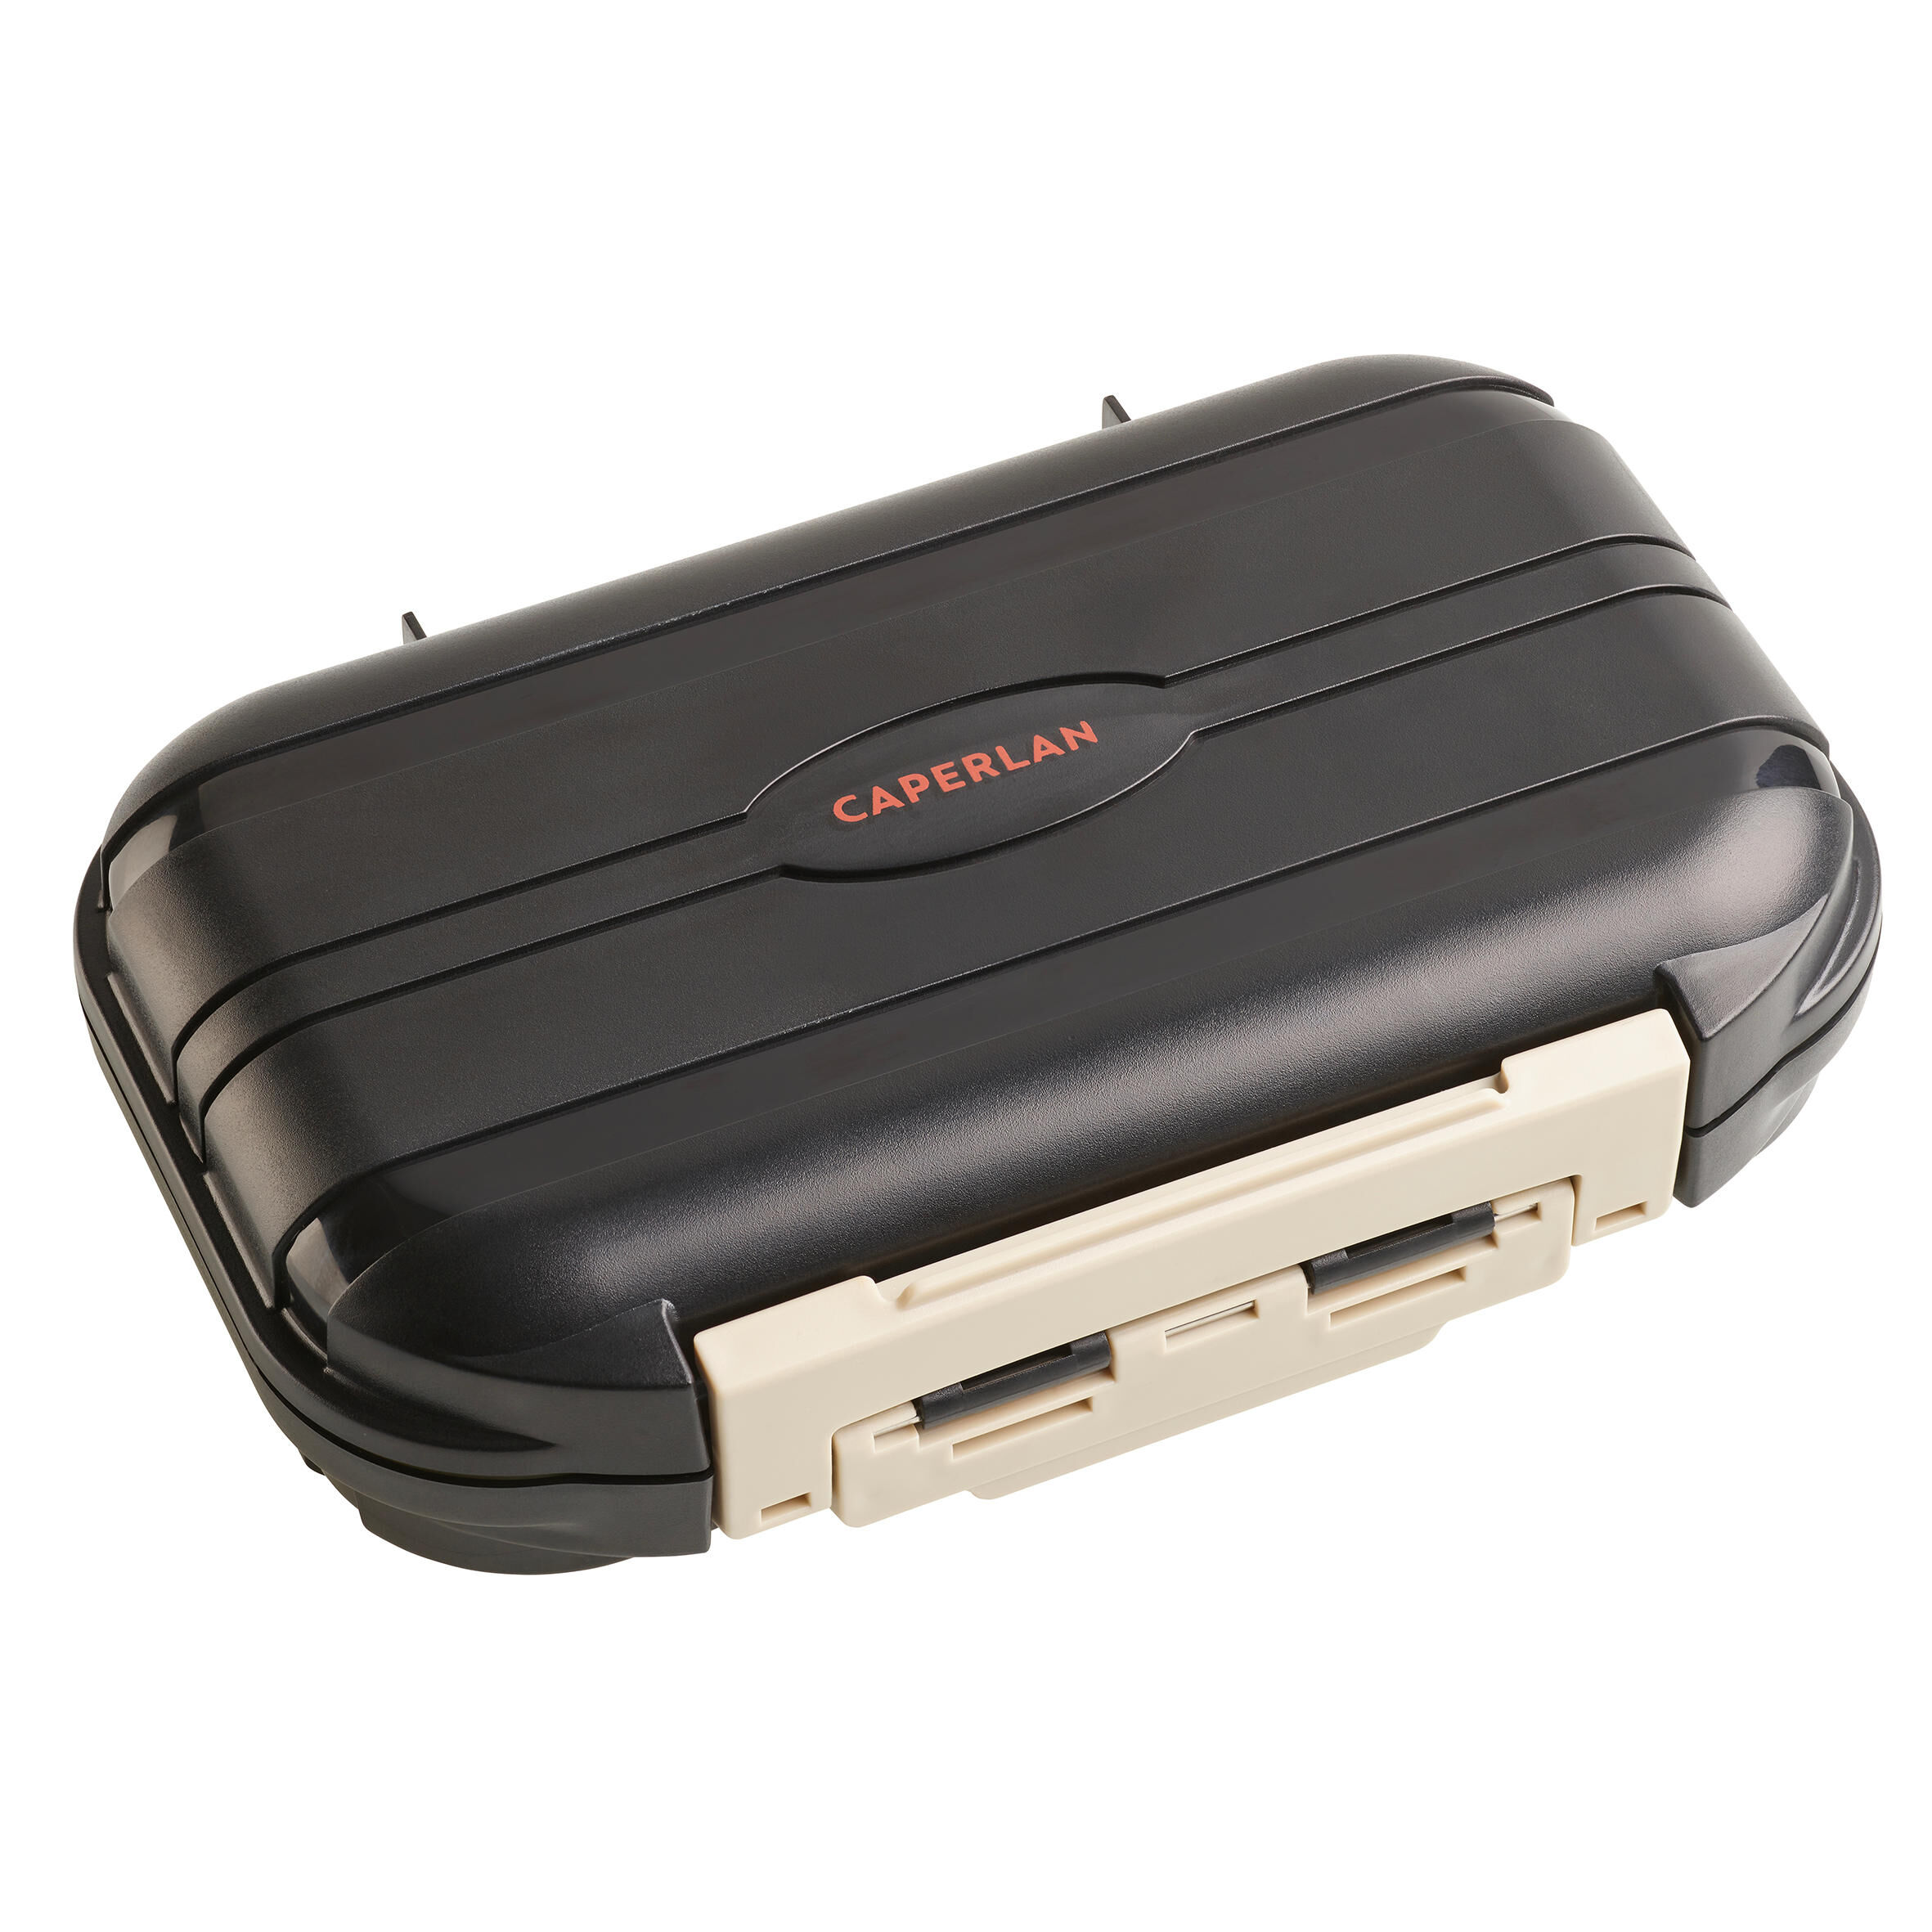 CAPERLAN FLY FISHING FLY BOX L